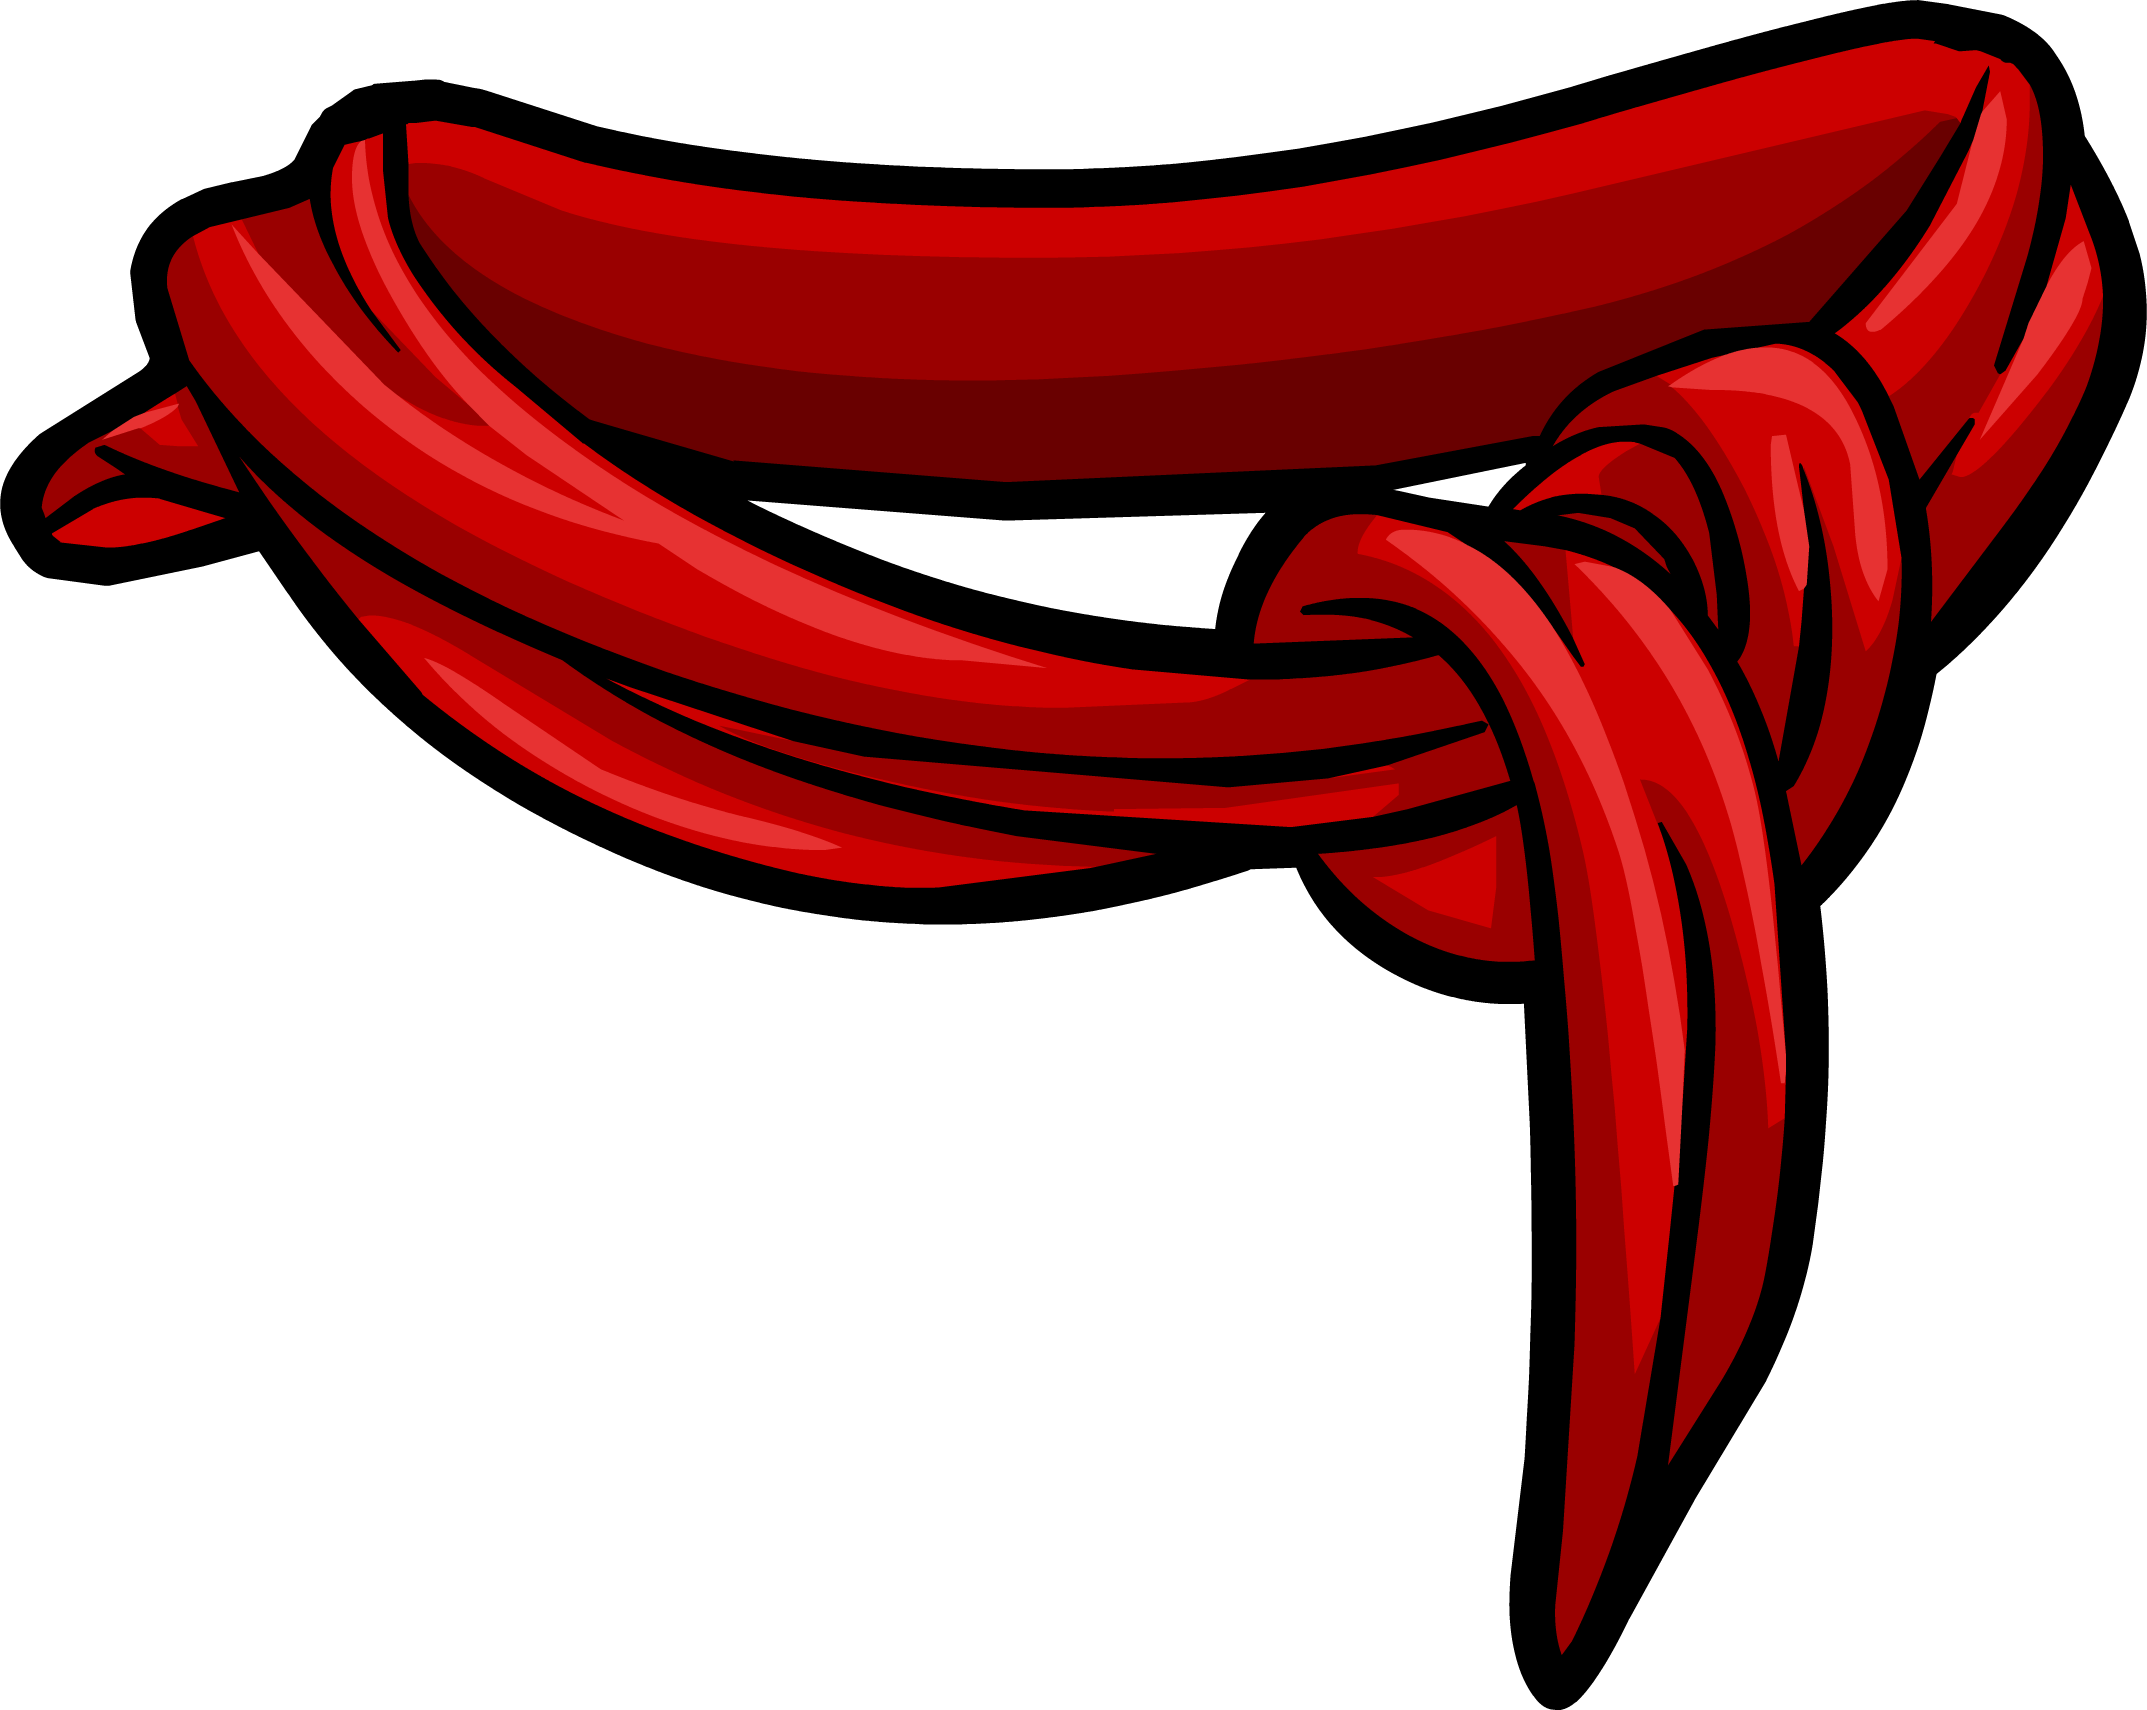 A Red Scarf With A Knot